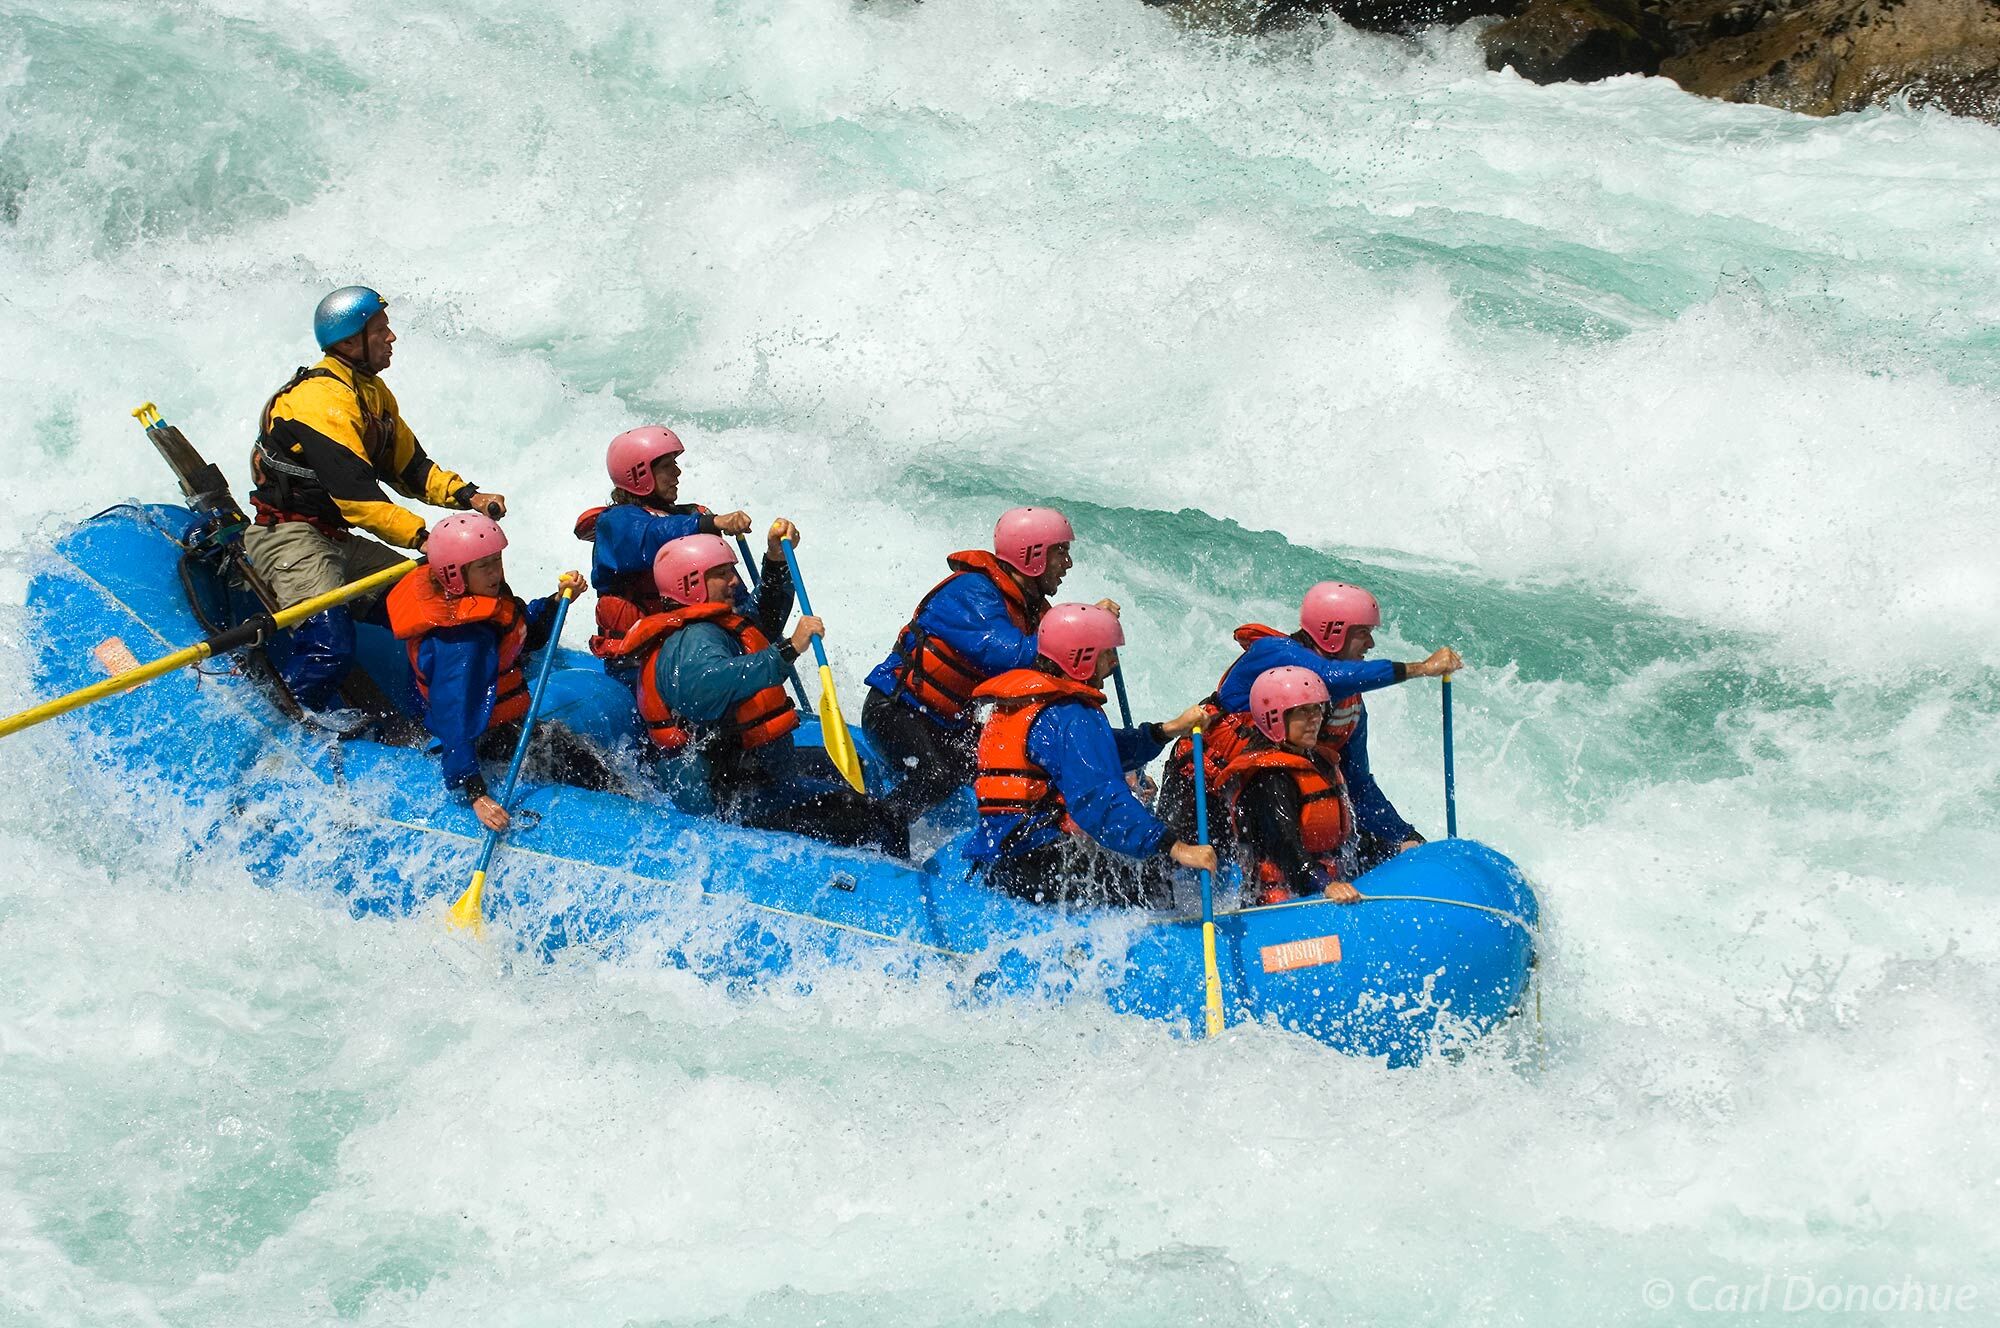 Fun and adventure Whitewater rafting on the Futaleufu River. Mondaca rapid, the Bridge to Bridge section, Puente a Puente. Rafting...